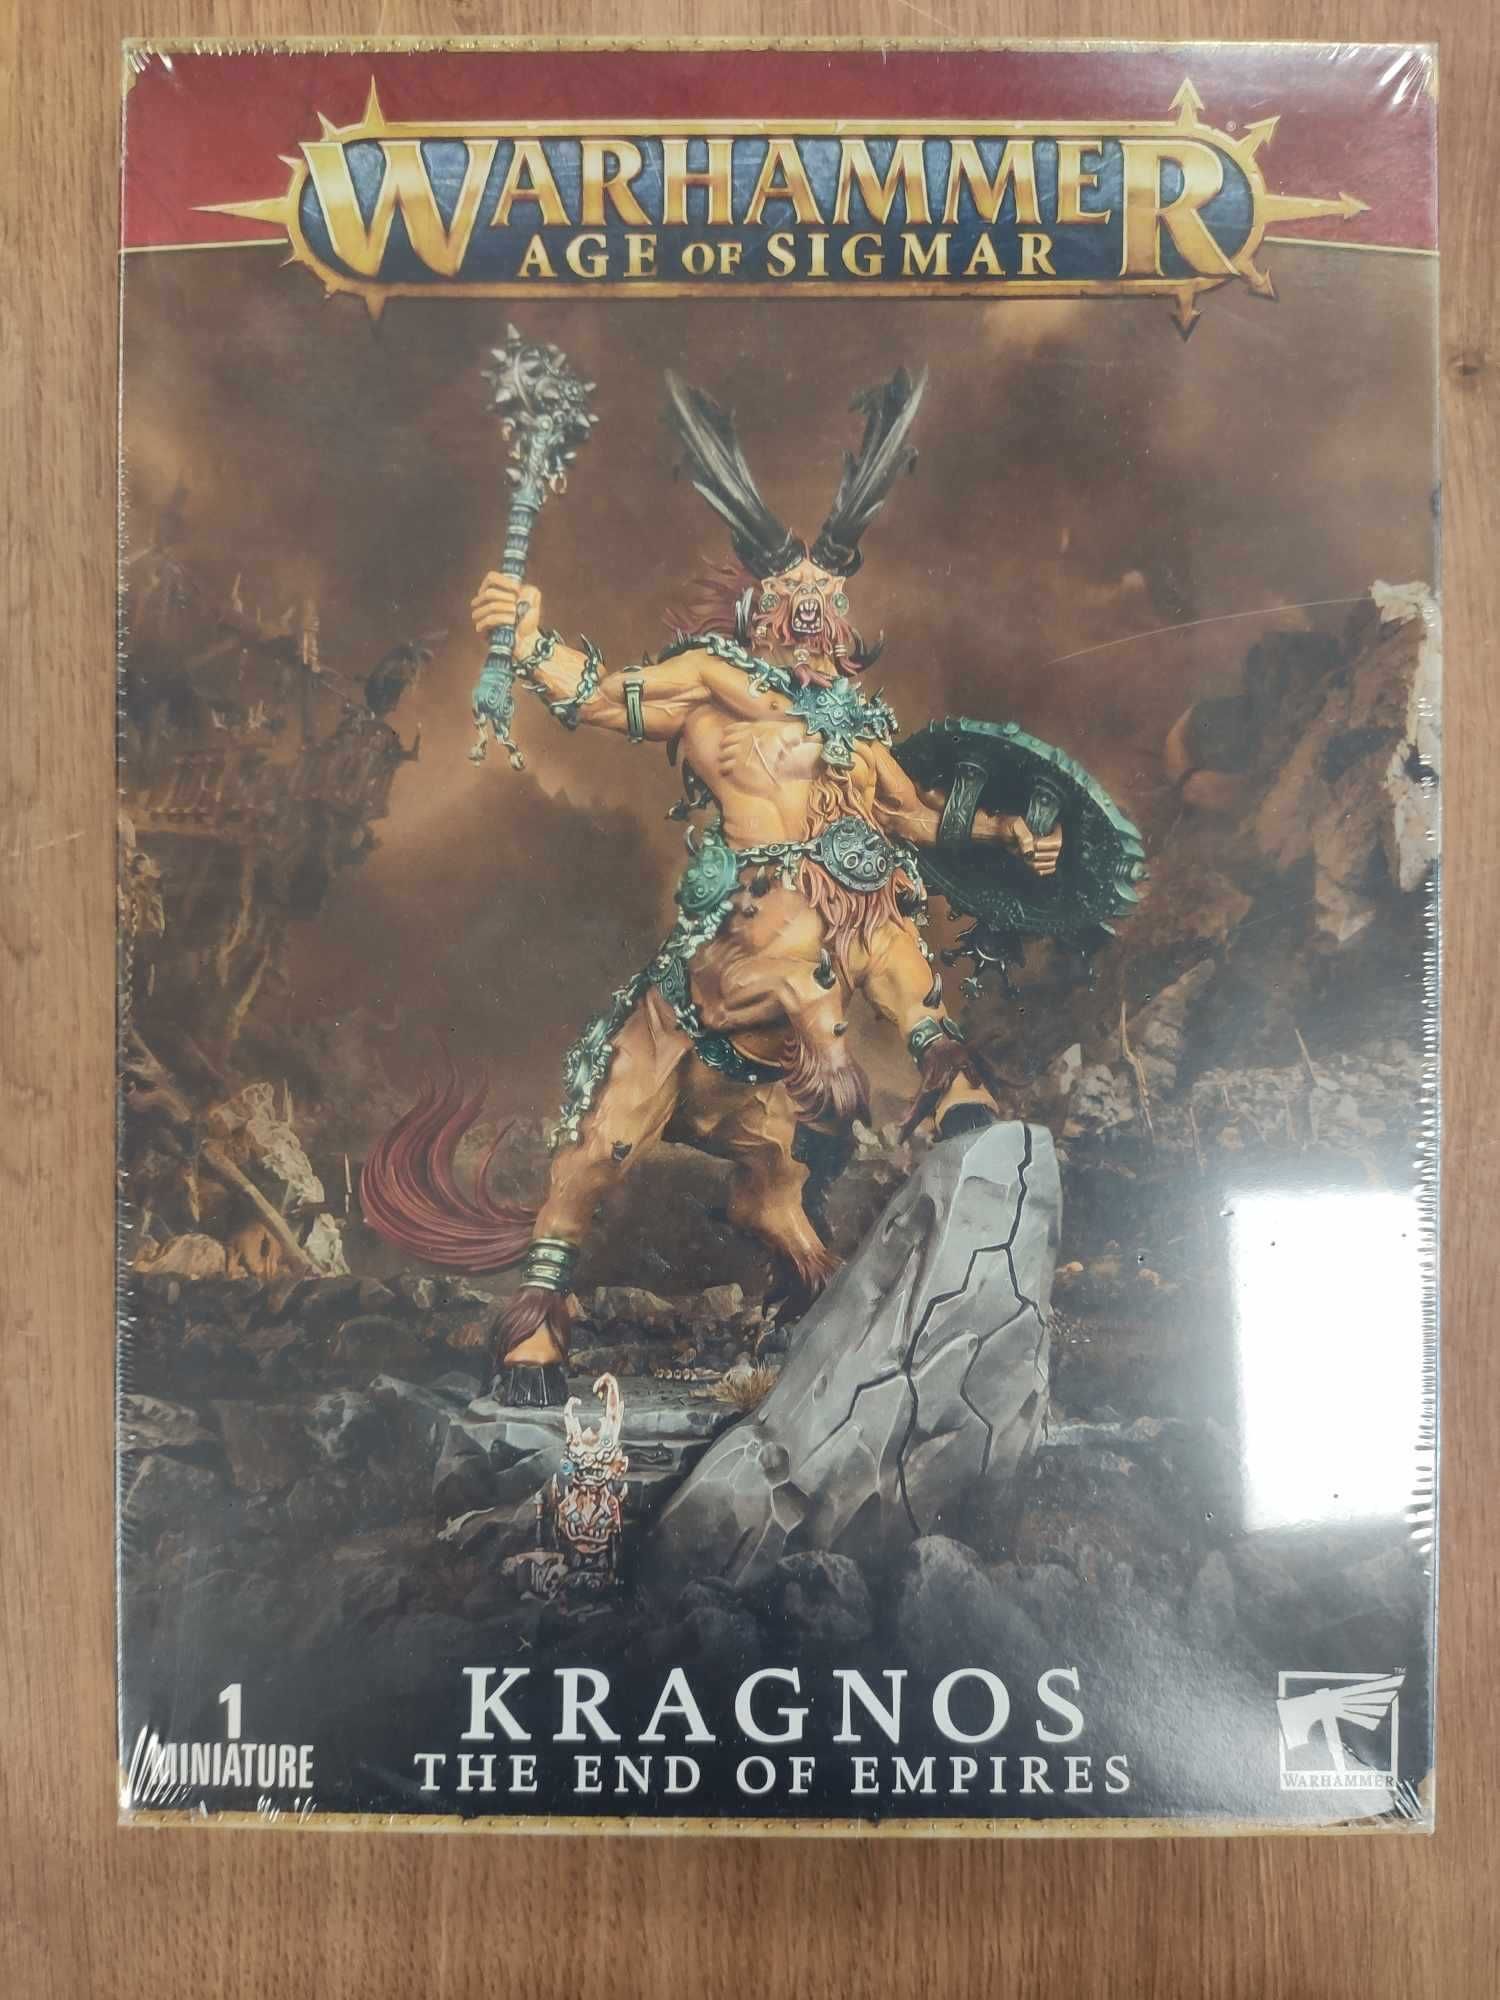 Kragnos the End of Empires - Warhammer Age of Sigmar AoS